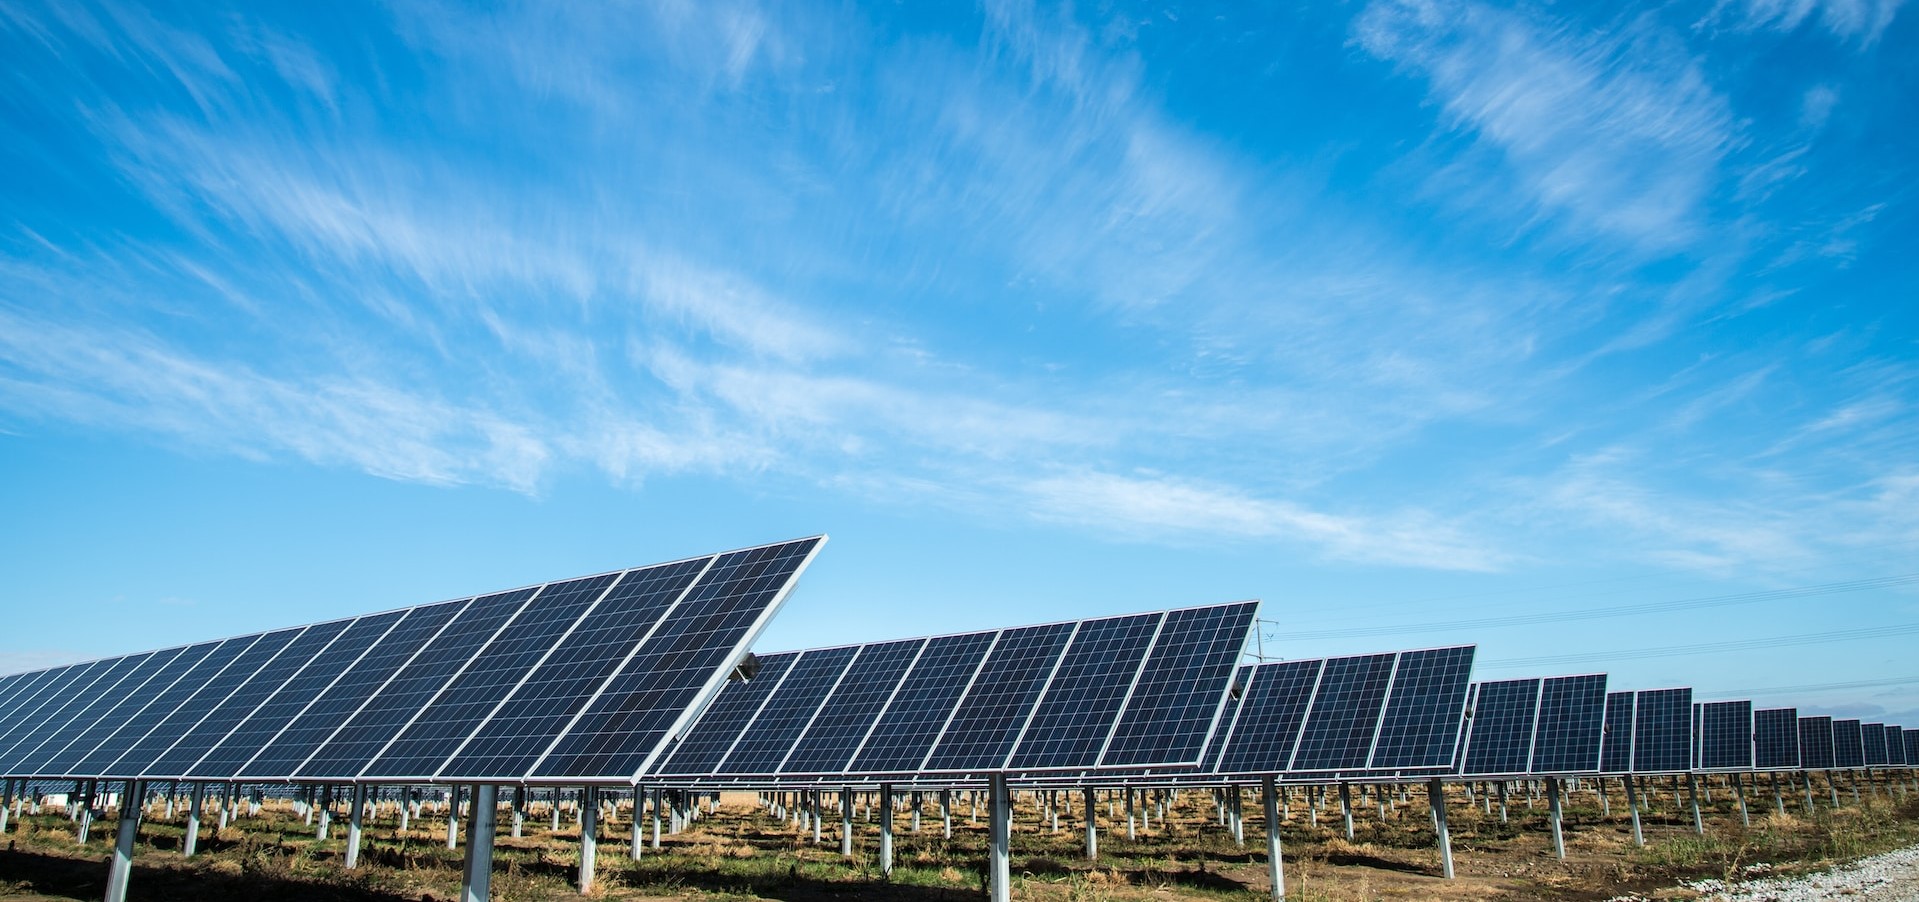 Rows of solar panels on the ground pointing up to a cloudy blue sky